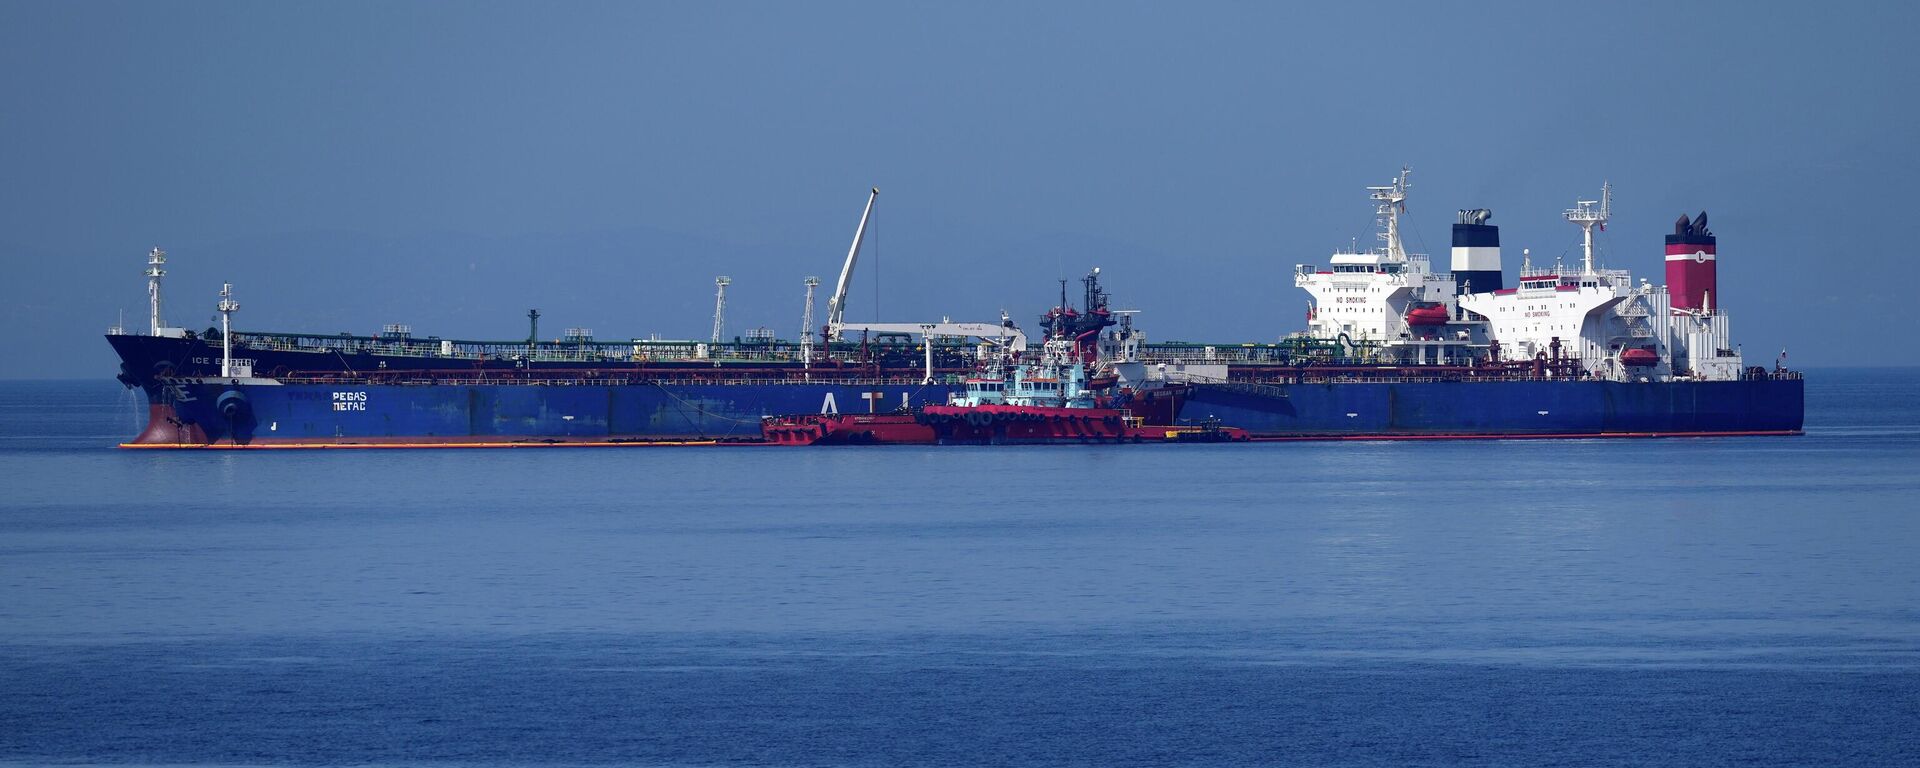 The Pegas tanker, that has recently changed its name to Lana, is seen off the port of Karystos on the Aegean Sea island of Evia, Greece, Friday, May 27, 2022. The crude oil cargo of the Iranian-flagged tanker that was stopped in Greek waters last month has been seized and is being transferred to another vessel following a request from the U.S., a Greek official said Thursday. (AP Photo/Thanassis Stavrakis) - Sputnik International, 1920, 07.09.2023